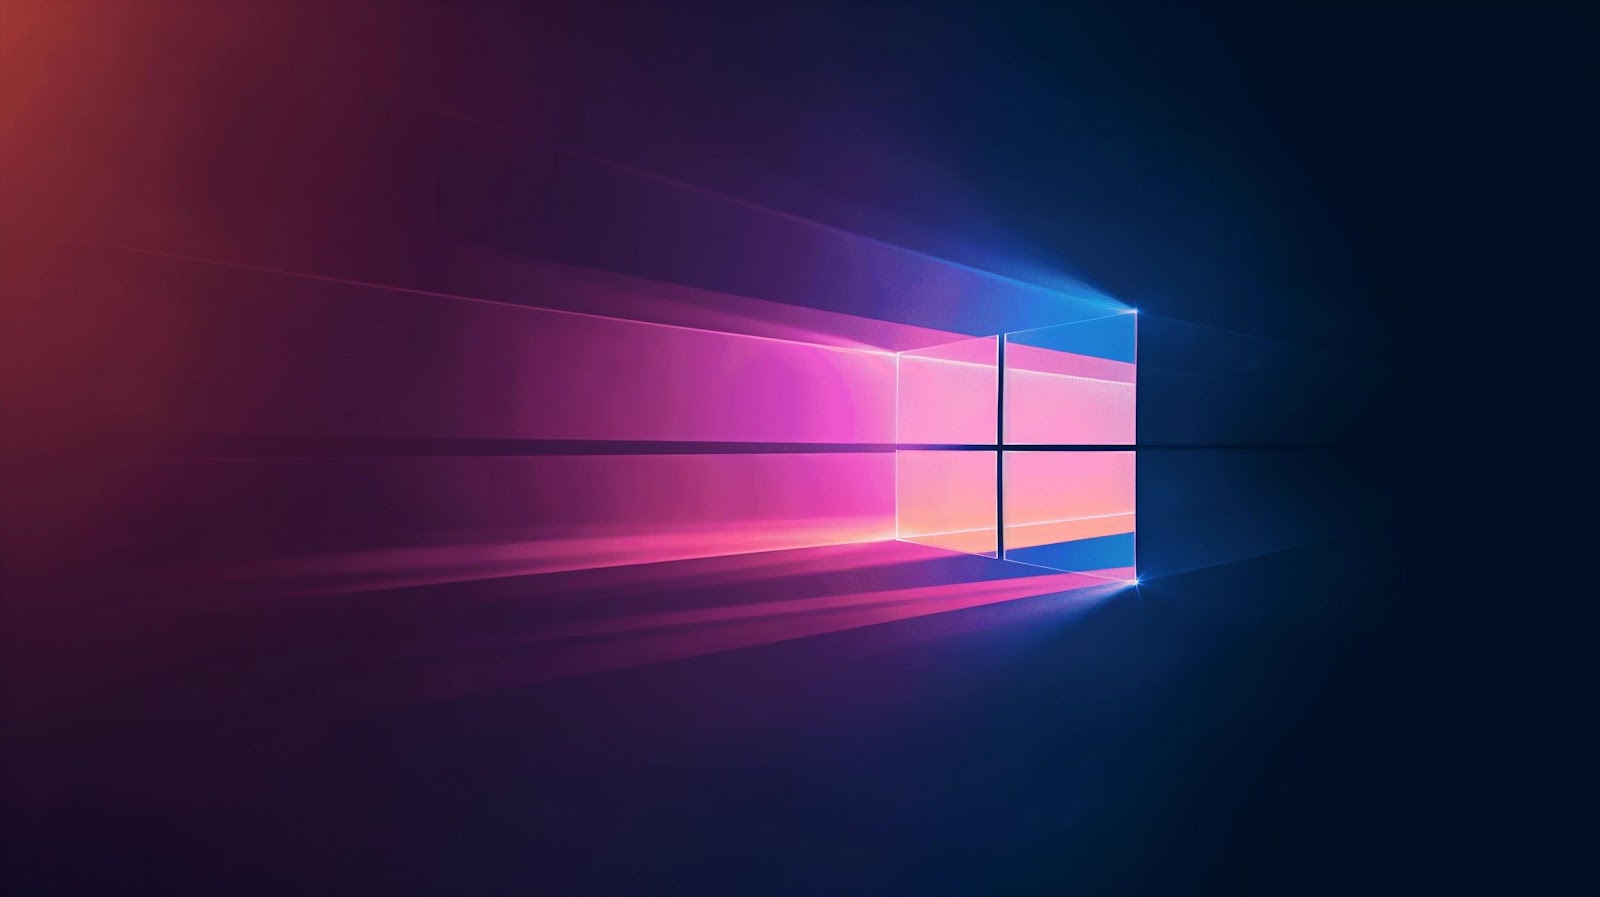 A list of hardware and software requirements for Windows 11 including processor, RAM, storage, display, graphics card, TPM version, UEFI firmware, and internet connection.